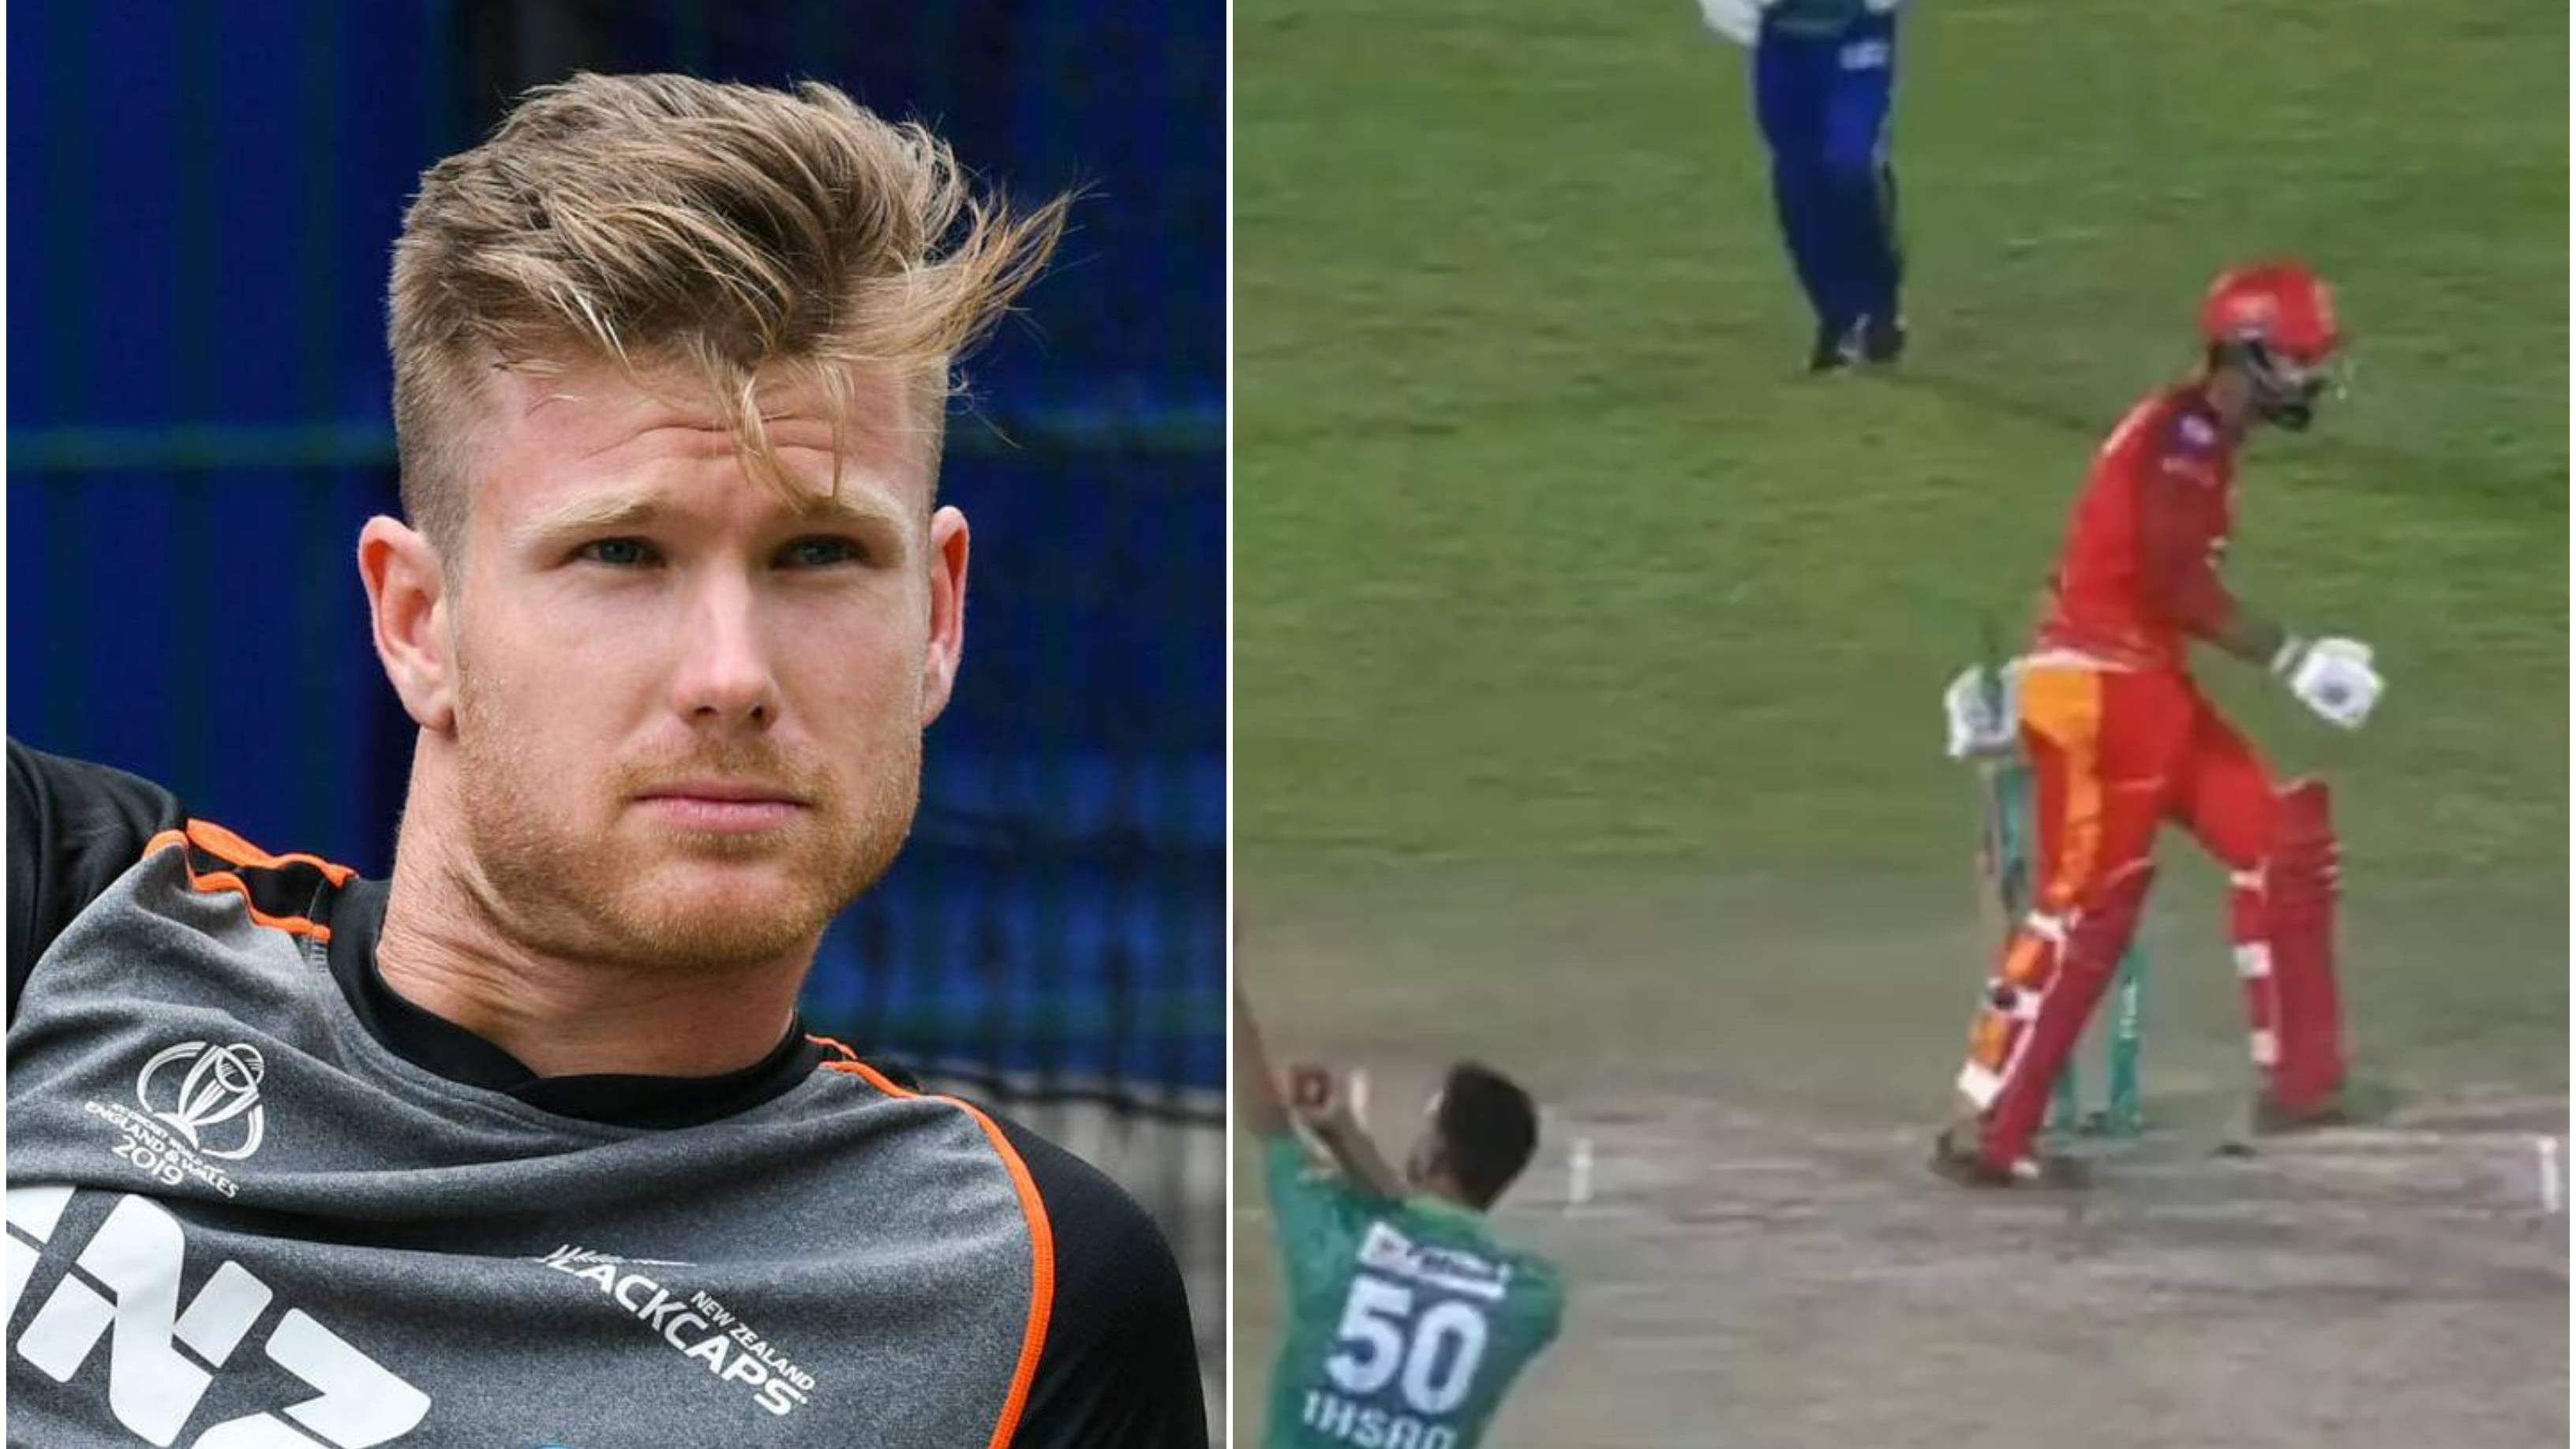 PSL 2023: WATCH – Shadab Khan’s cuss word caught on stump mic, Neesham asks why he shouted at Ben Stokes